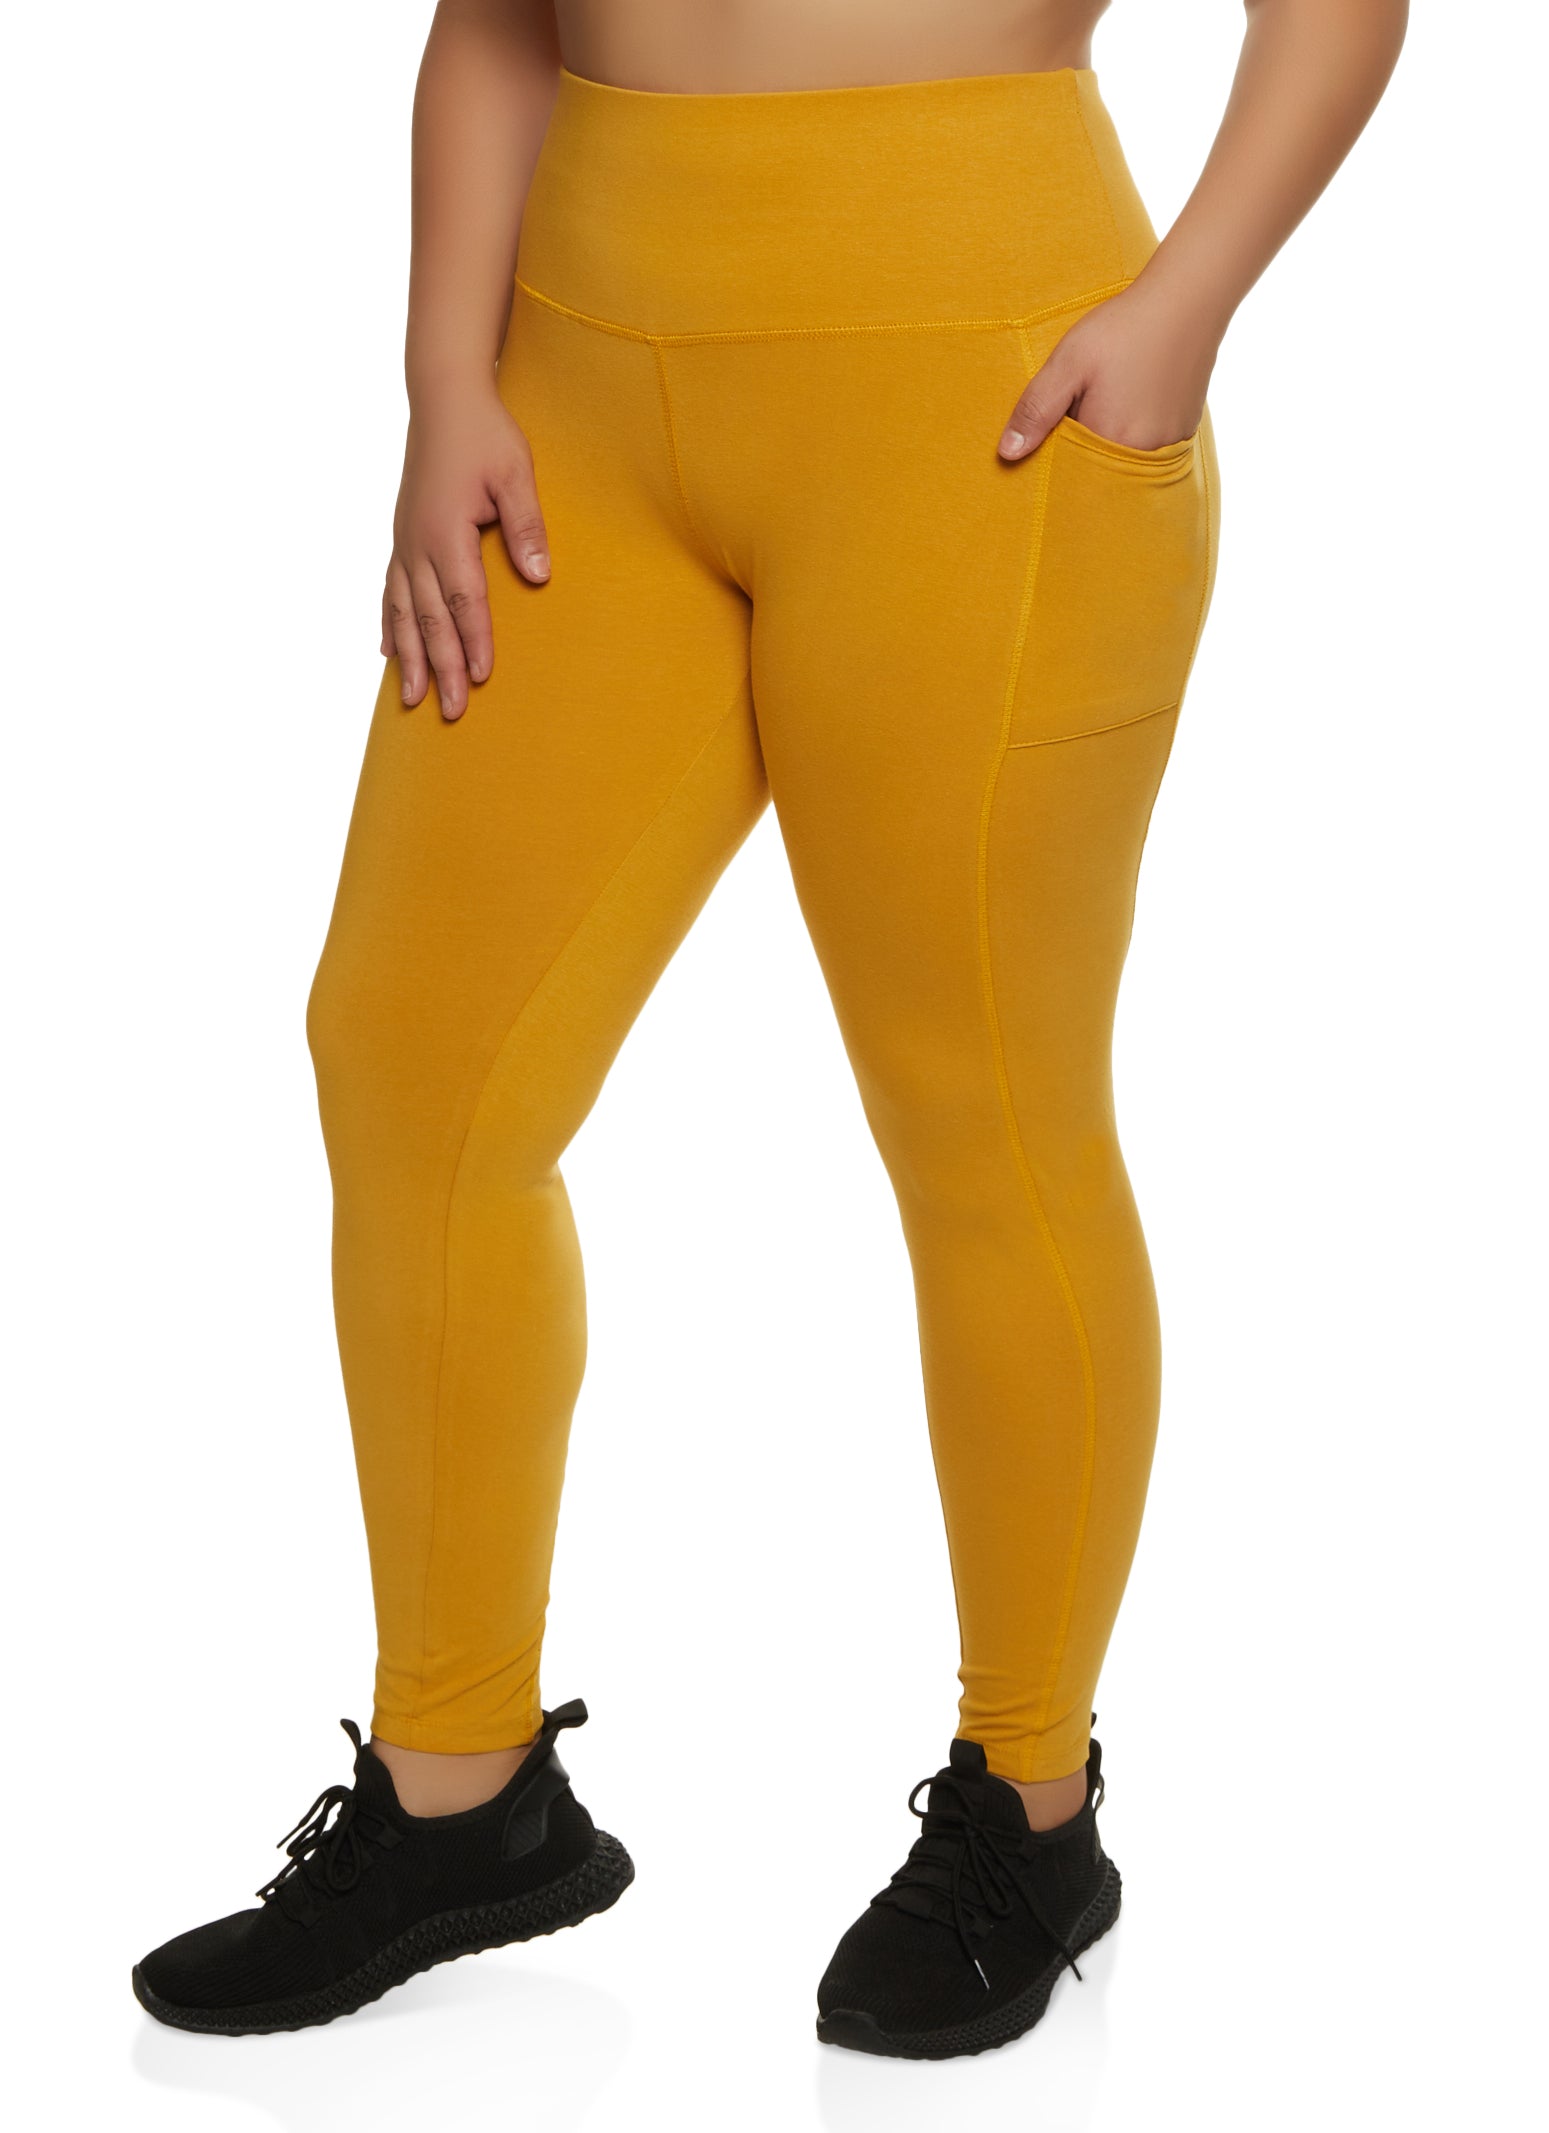 Plus Size High Waist Brushed Legging Pants Yellow - Pack of 6